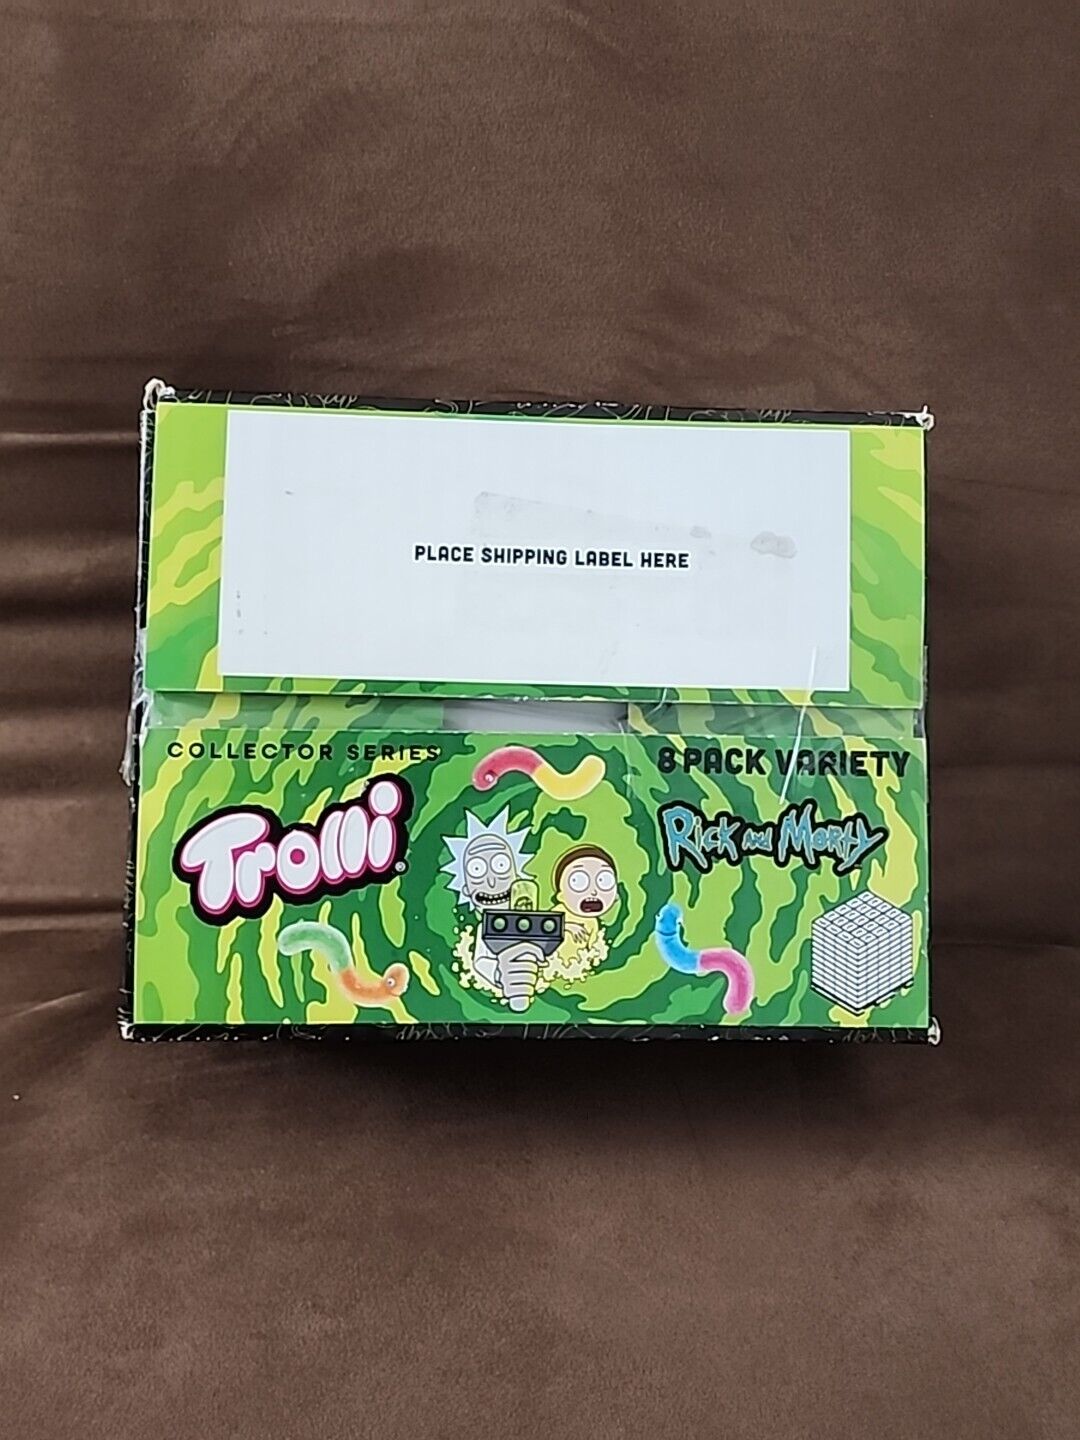 Collectors Series - Rick and Morty Trolli Gummy Worms  - Sealed Box of 8, RARE